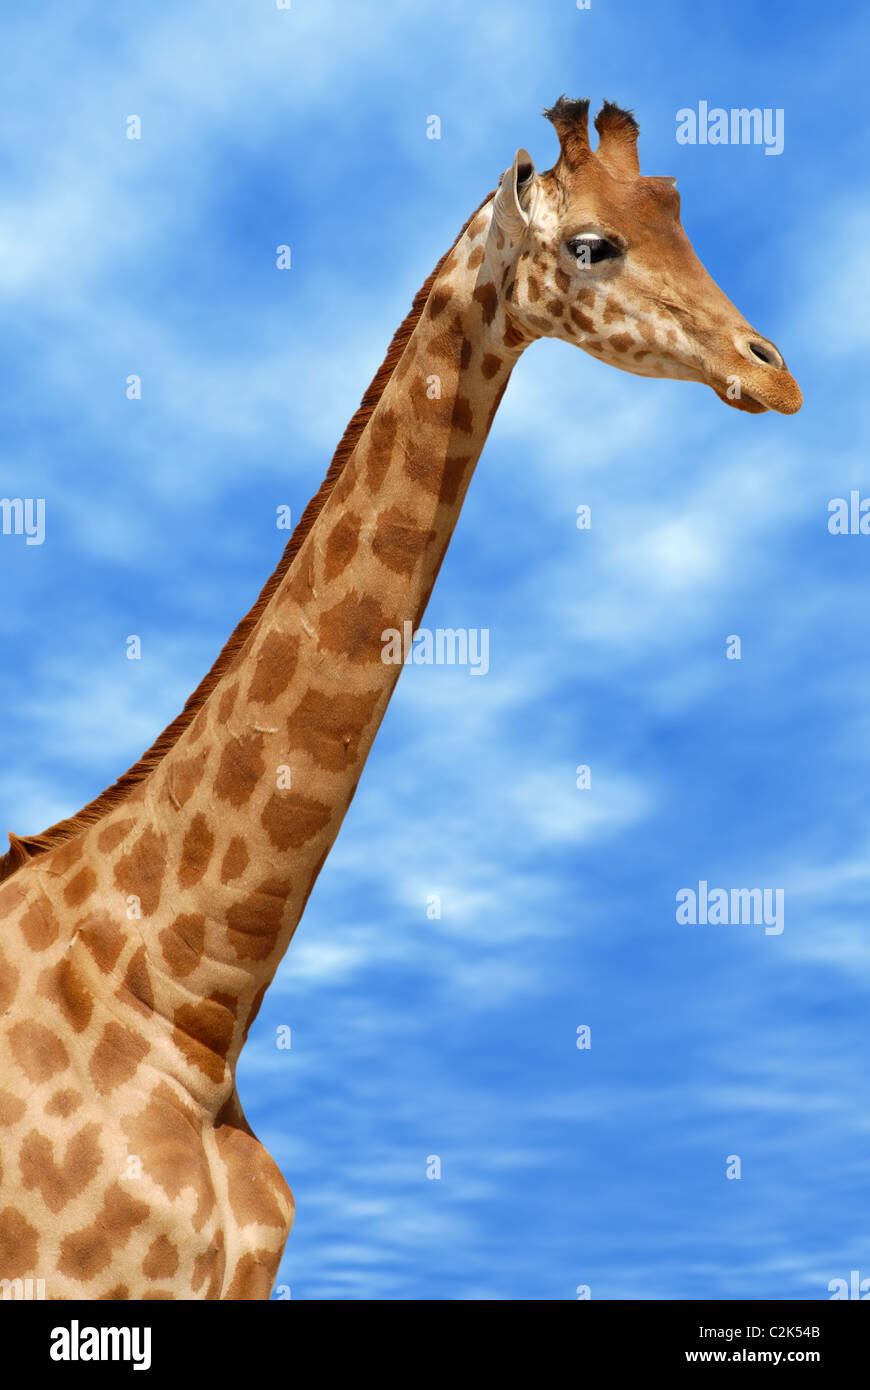 Profile portrait with the neck of giraffe (Camelopardalis) on cloudy blue sky background Stock Photo